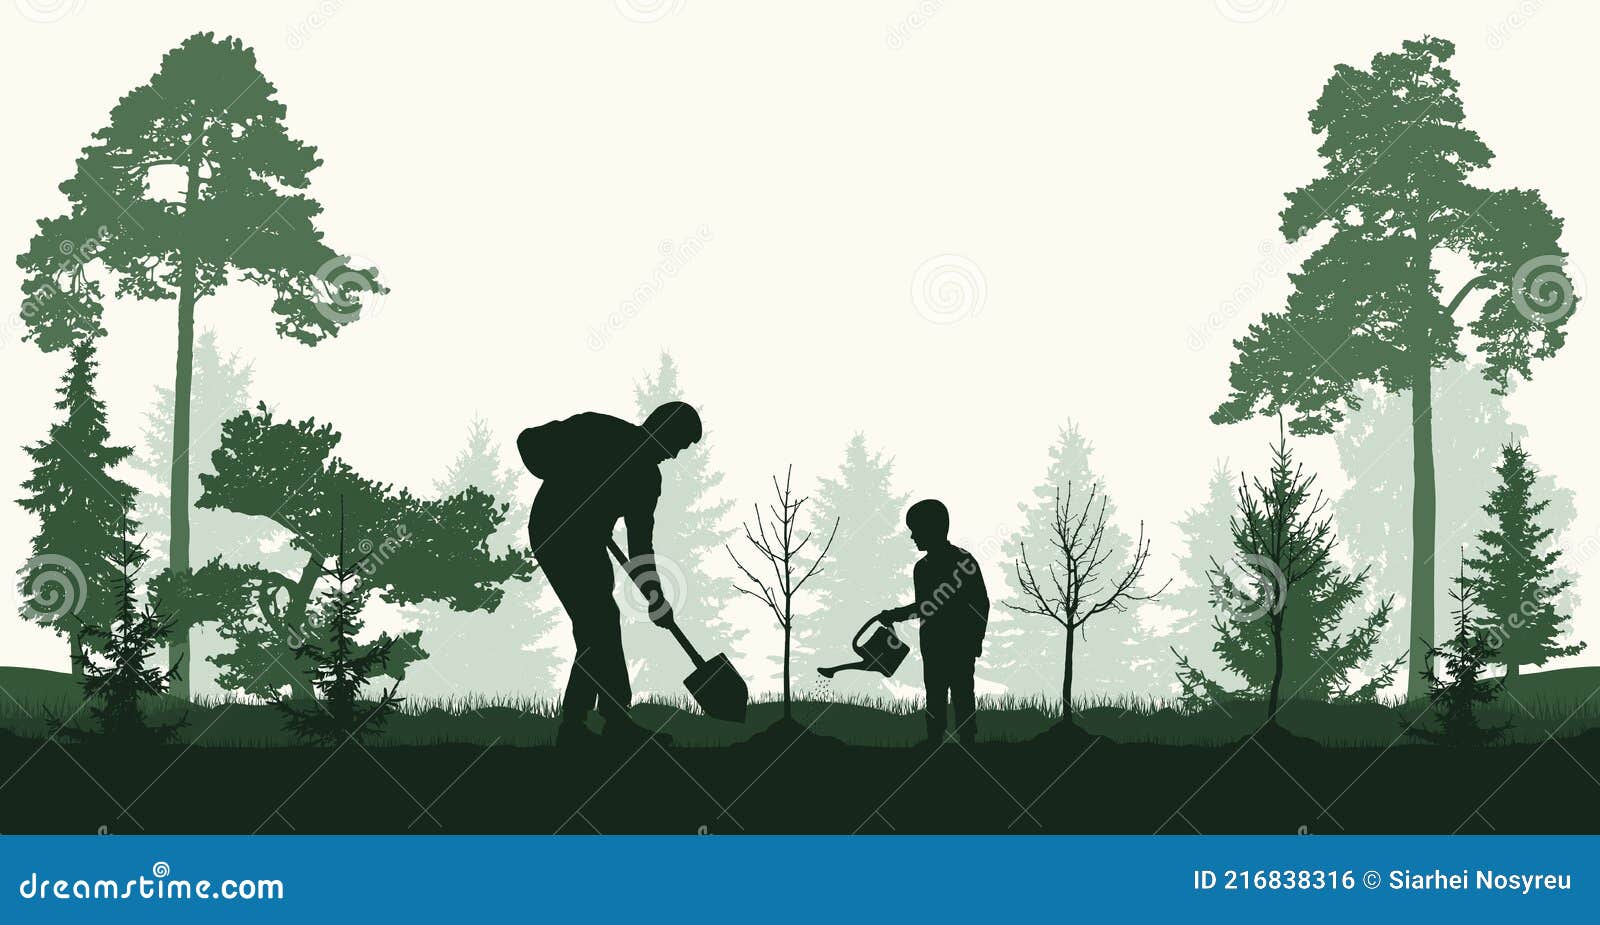 reforestation, planting trees in forest. man and child plant bare tree and fir trees, silhouette.  